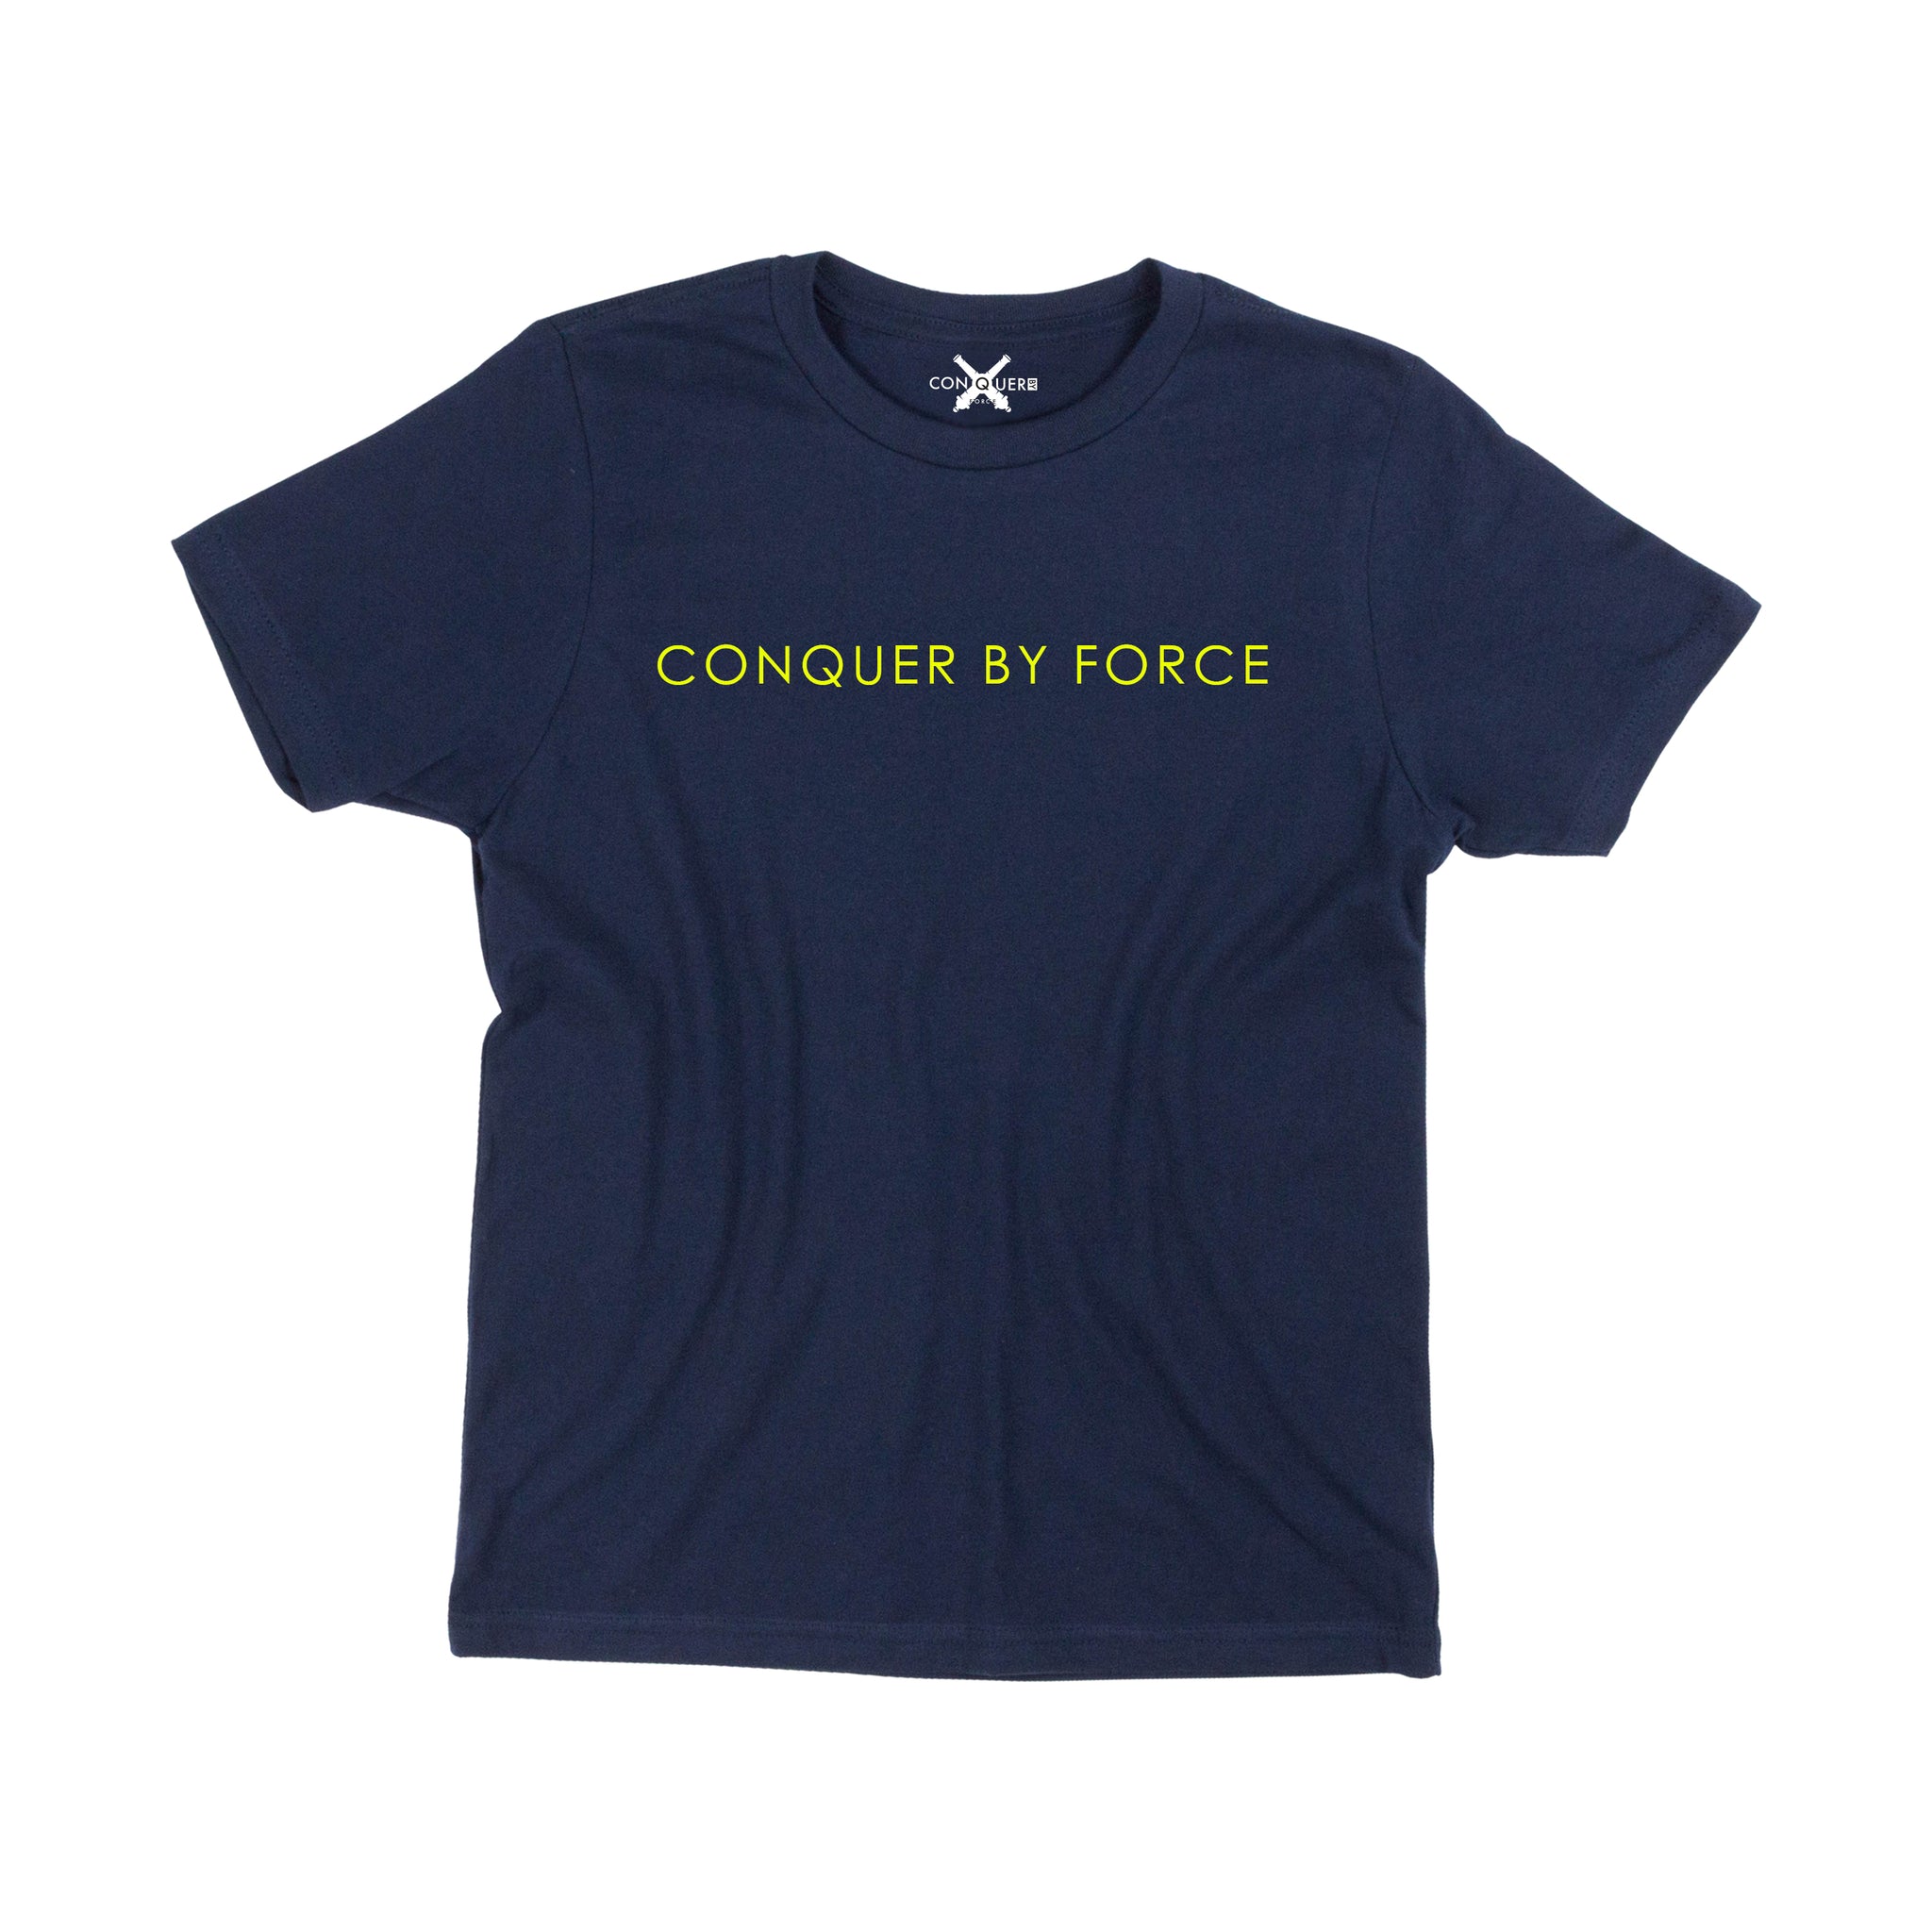 "Conquer By Force" T-Shirt